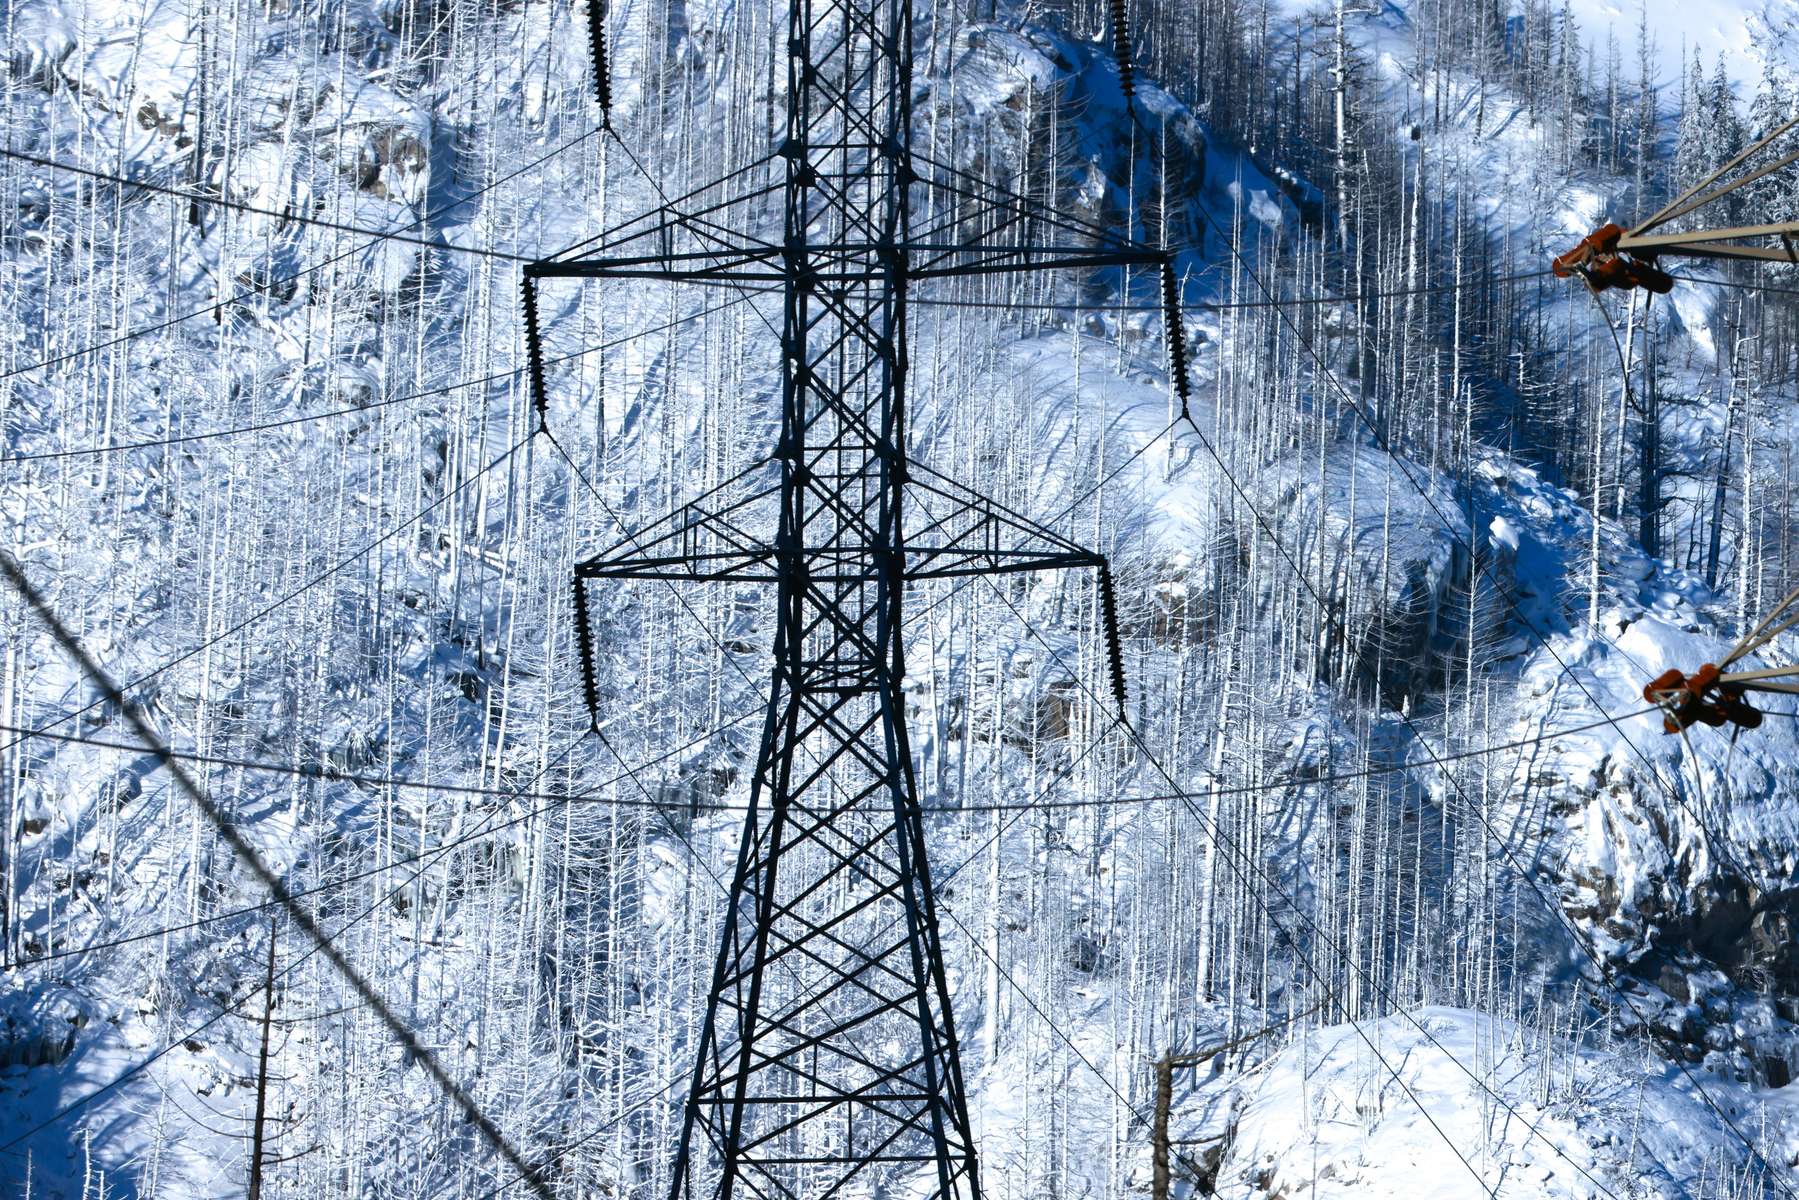 High-voltage transmission lines and snow peaked mountains and forests seen from Newhalem in the foothills of the North Cascades on Friday, January, 12, 2024. The Skagit River Hydroelectric Project consists of a series of dams and hydroelectric power stations including the Gorge Powerhouse located just below out of the frame.